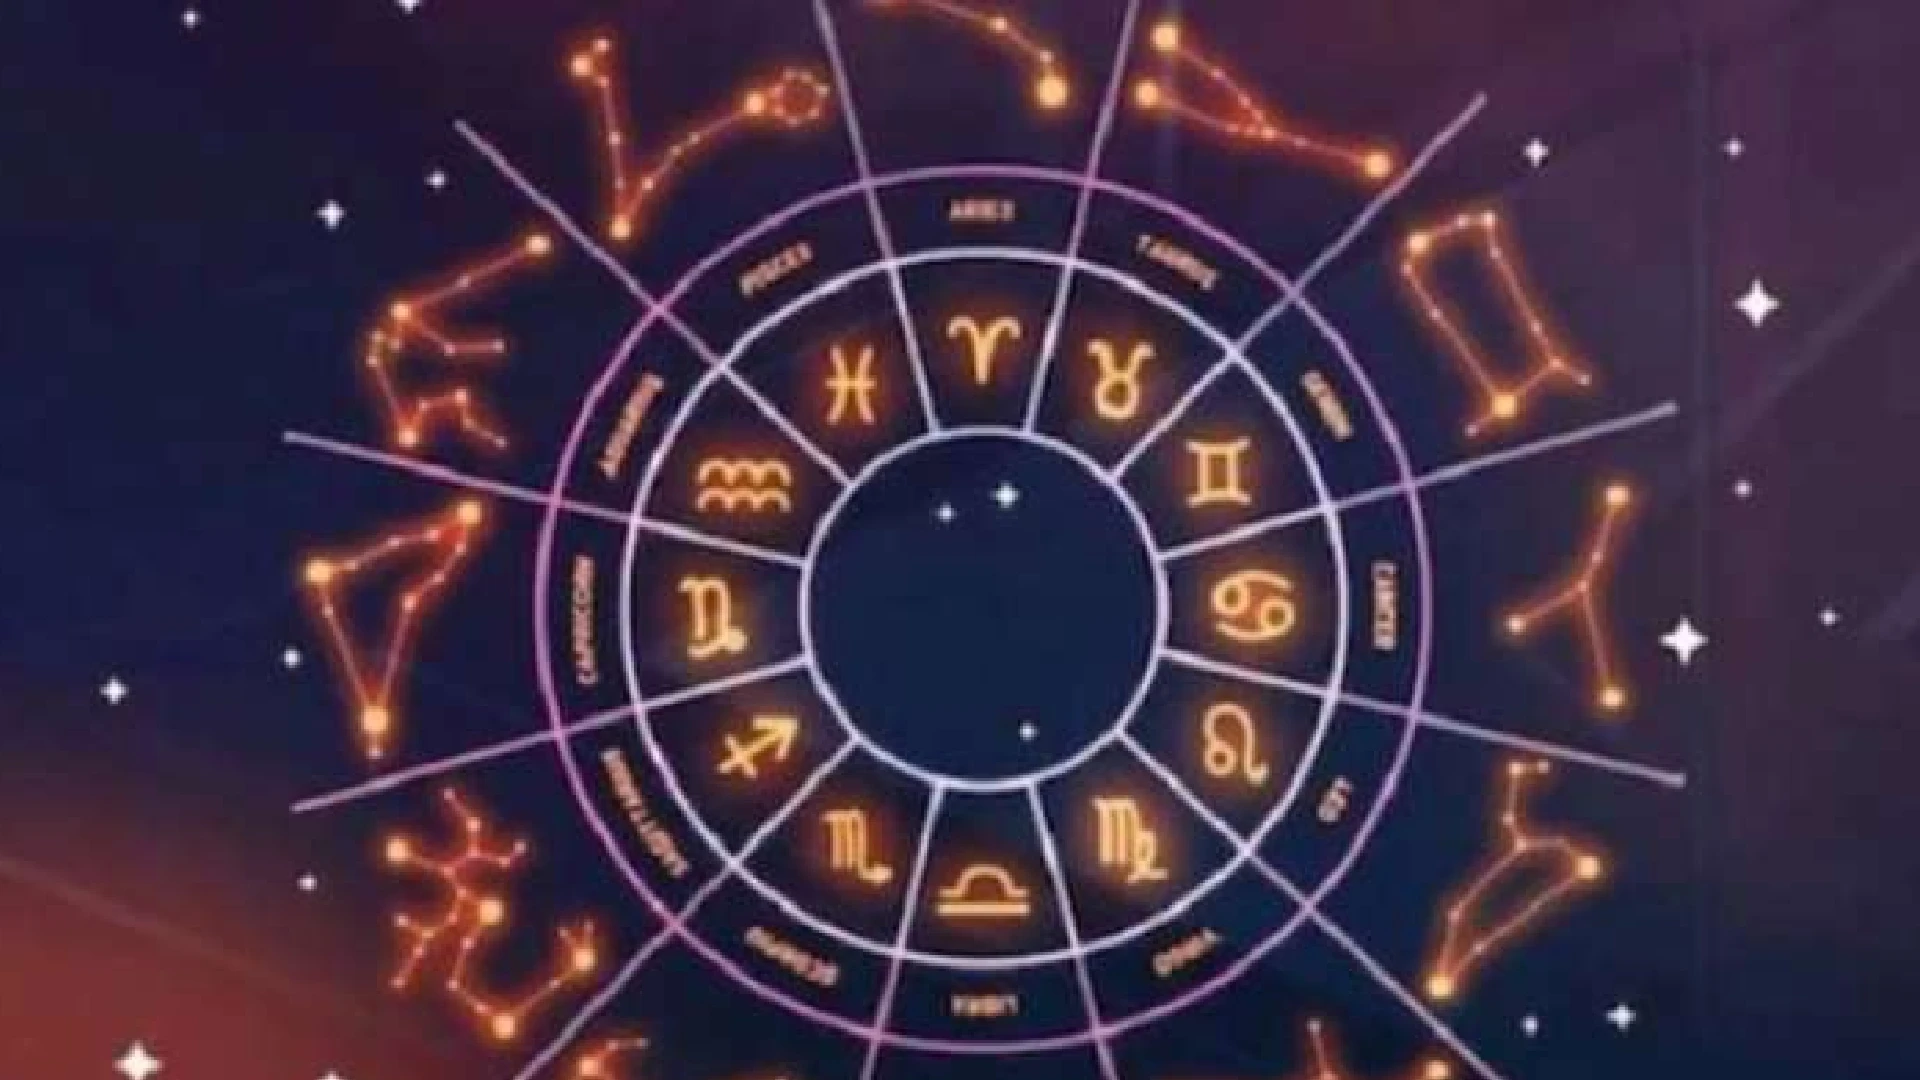 Smartest Zodiac Sign classified in order [2022]! Find Out the Smartest Zodiac Sign and the Dumbest Zodiac Sign